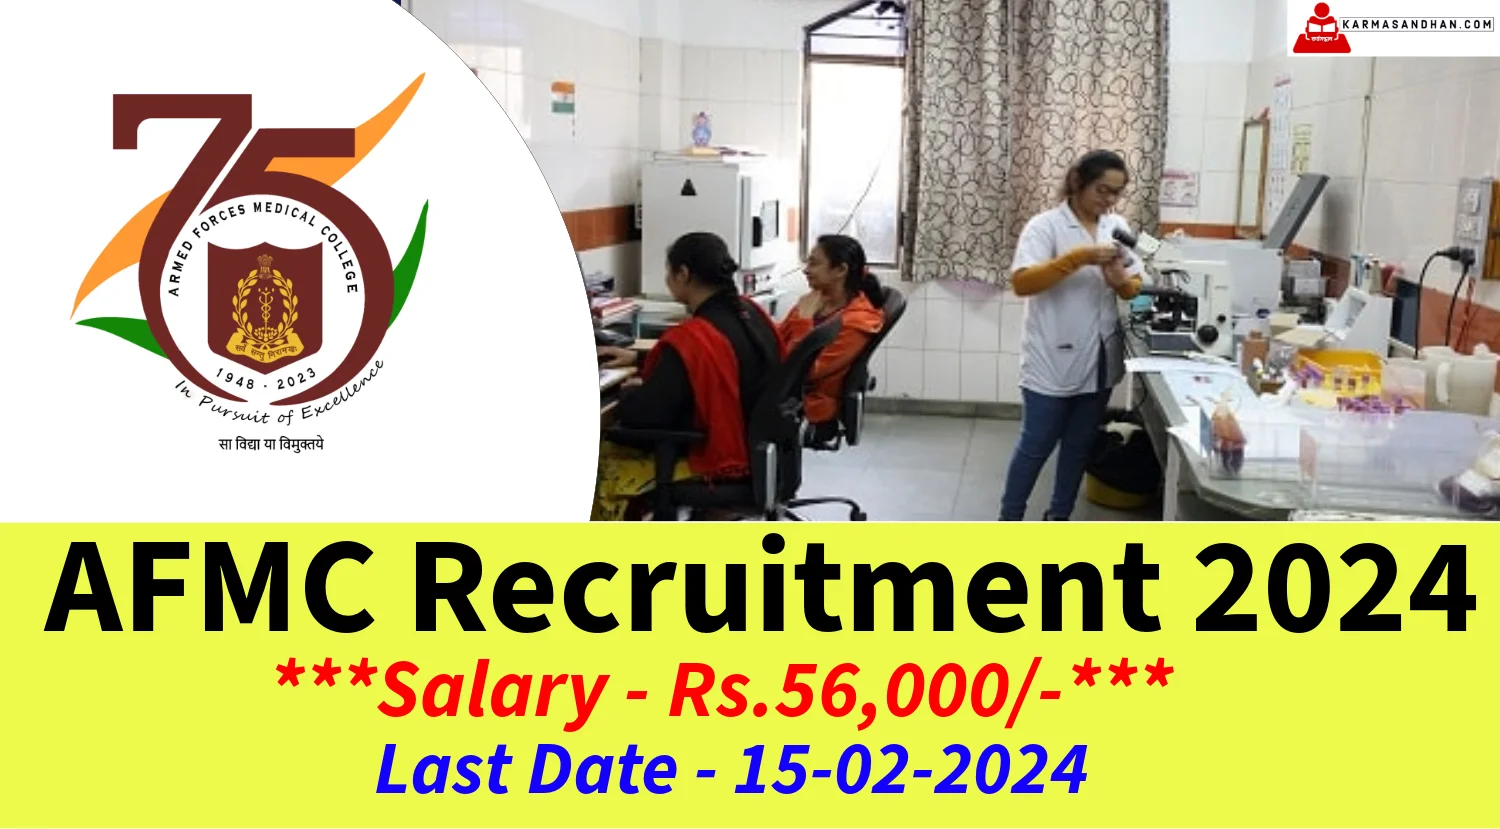 AFMC Recruitment 2024 Notification out for Non-Medical Posts